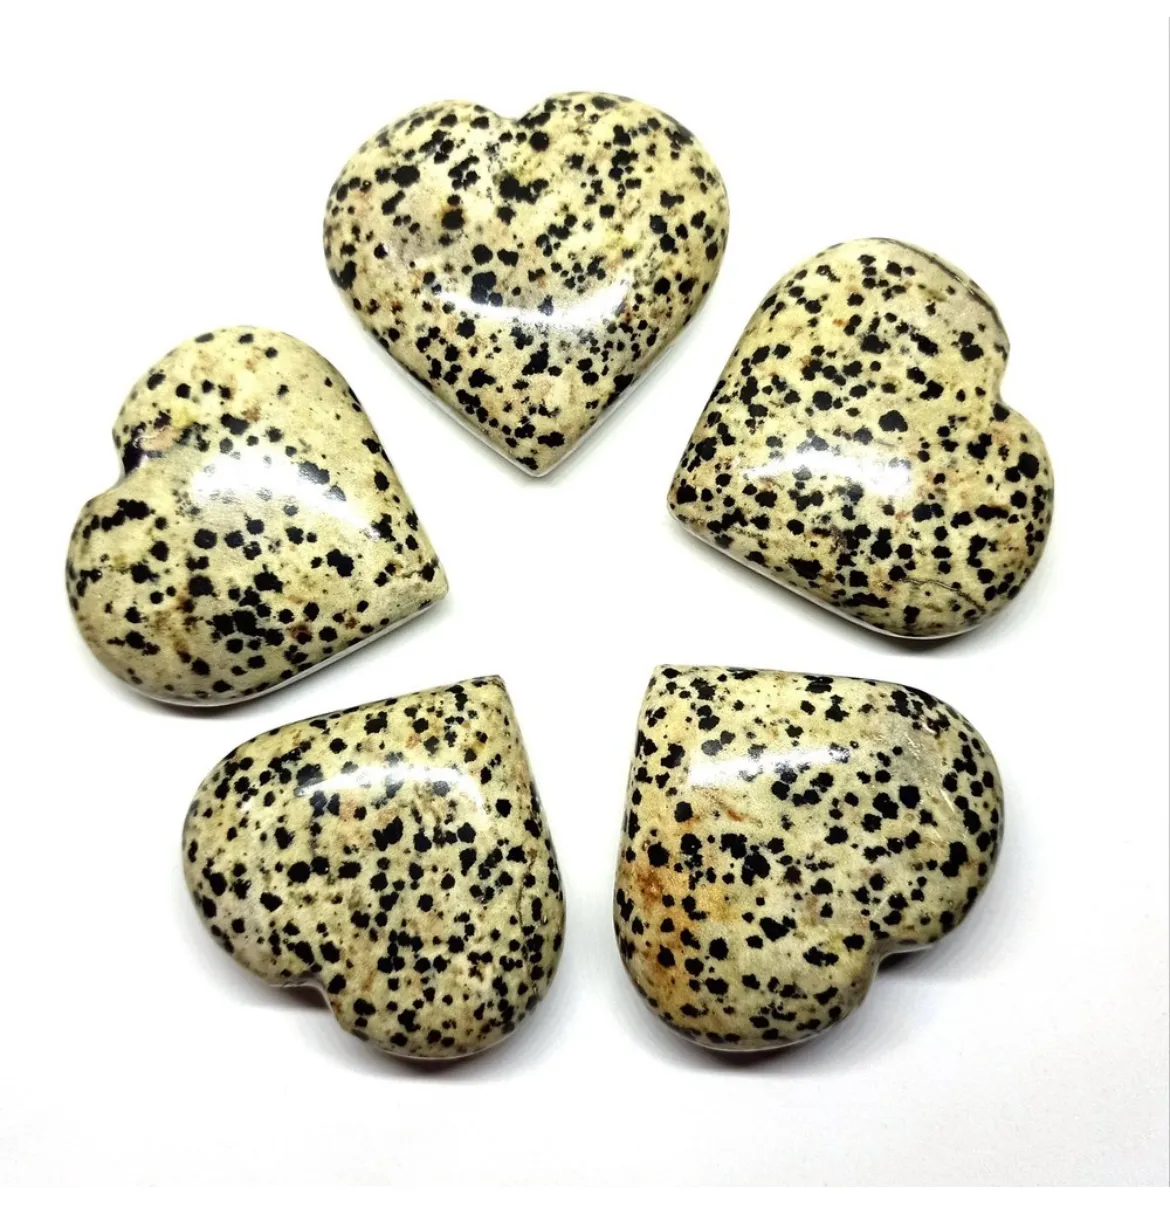 wholesale Natural Dalmatian Jasper Heart Shape Crystals Polished Hand Carved Healing For Meditation And Home Decoration